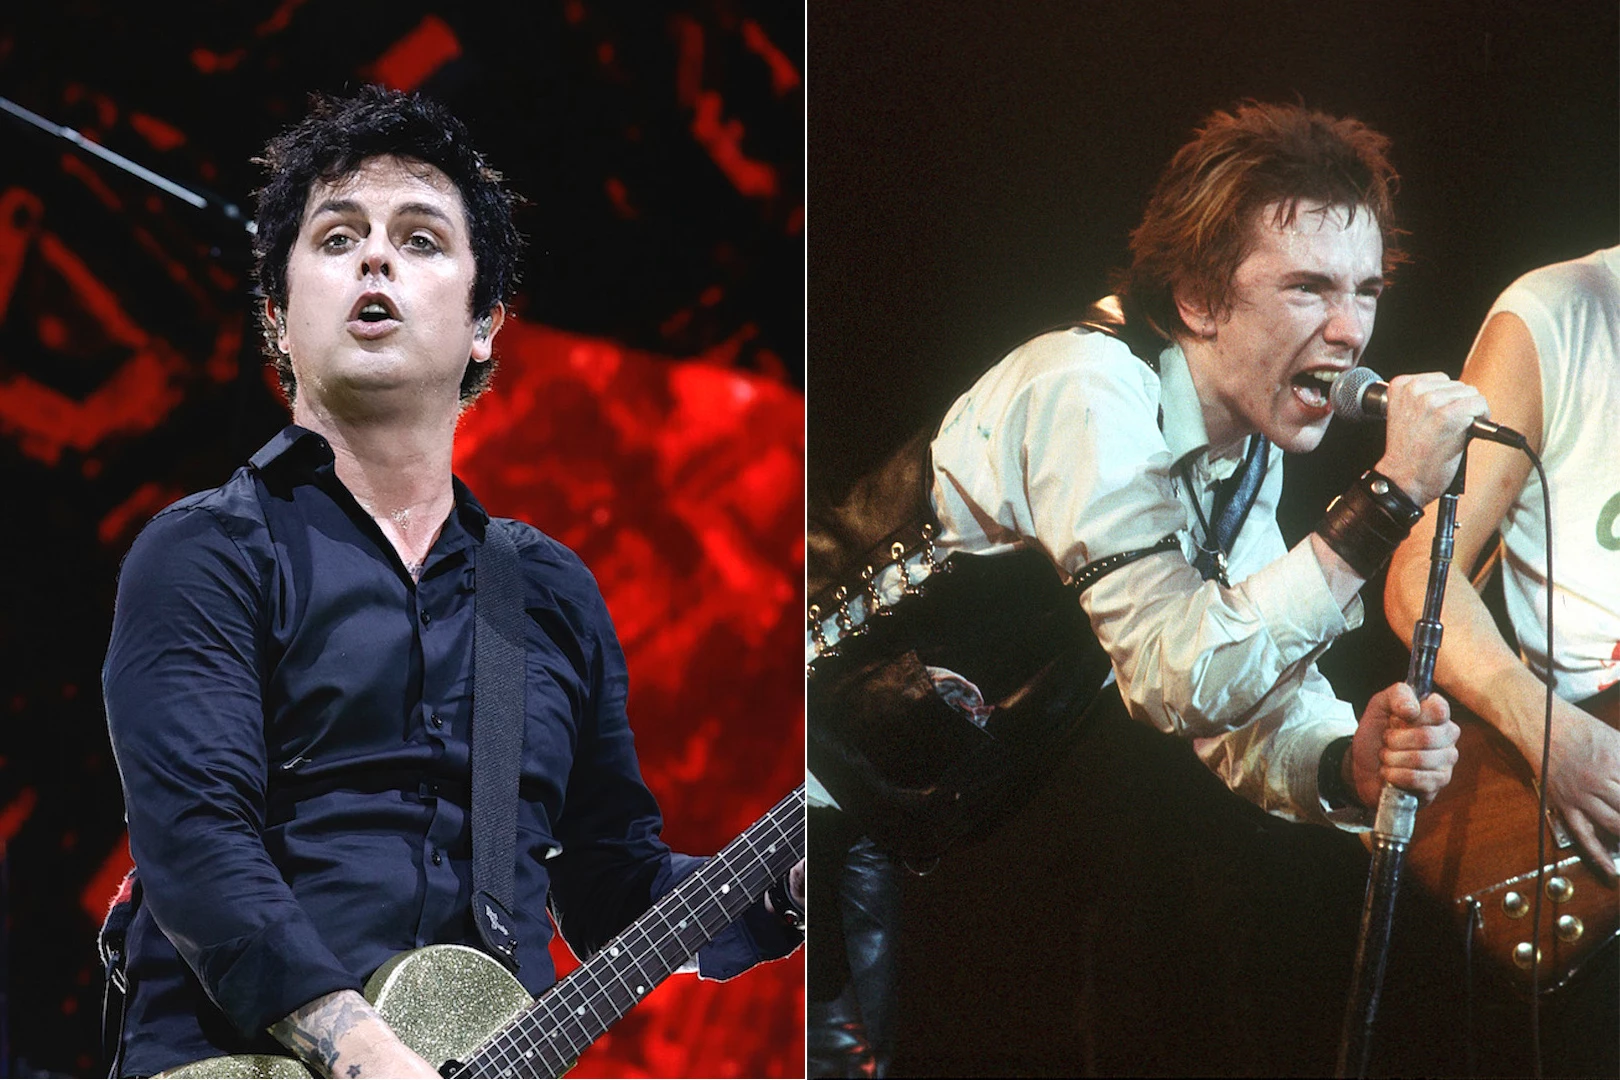 Green Day's Billie Joe Armstrong on His Blue Hair: 'I Don't Think I'll Ever Change It' - wide 4